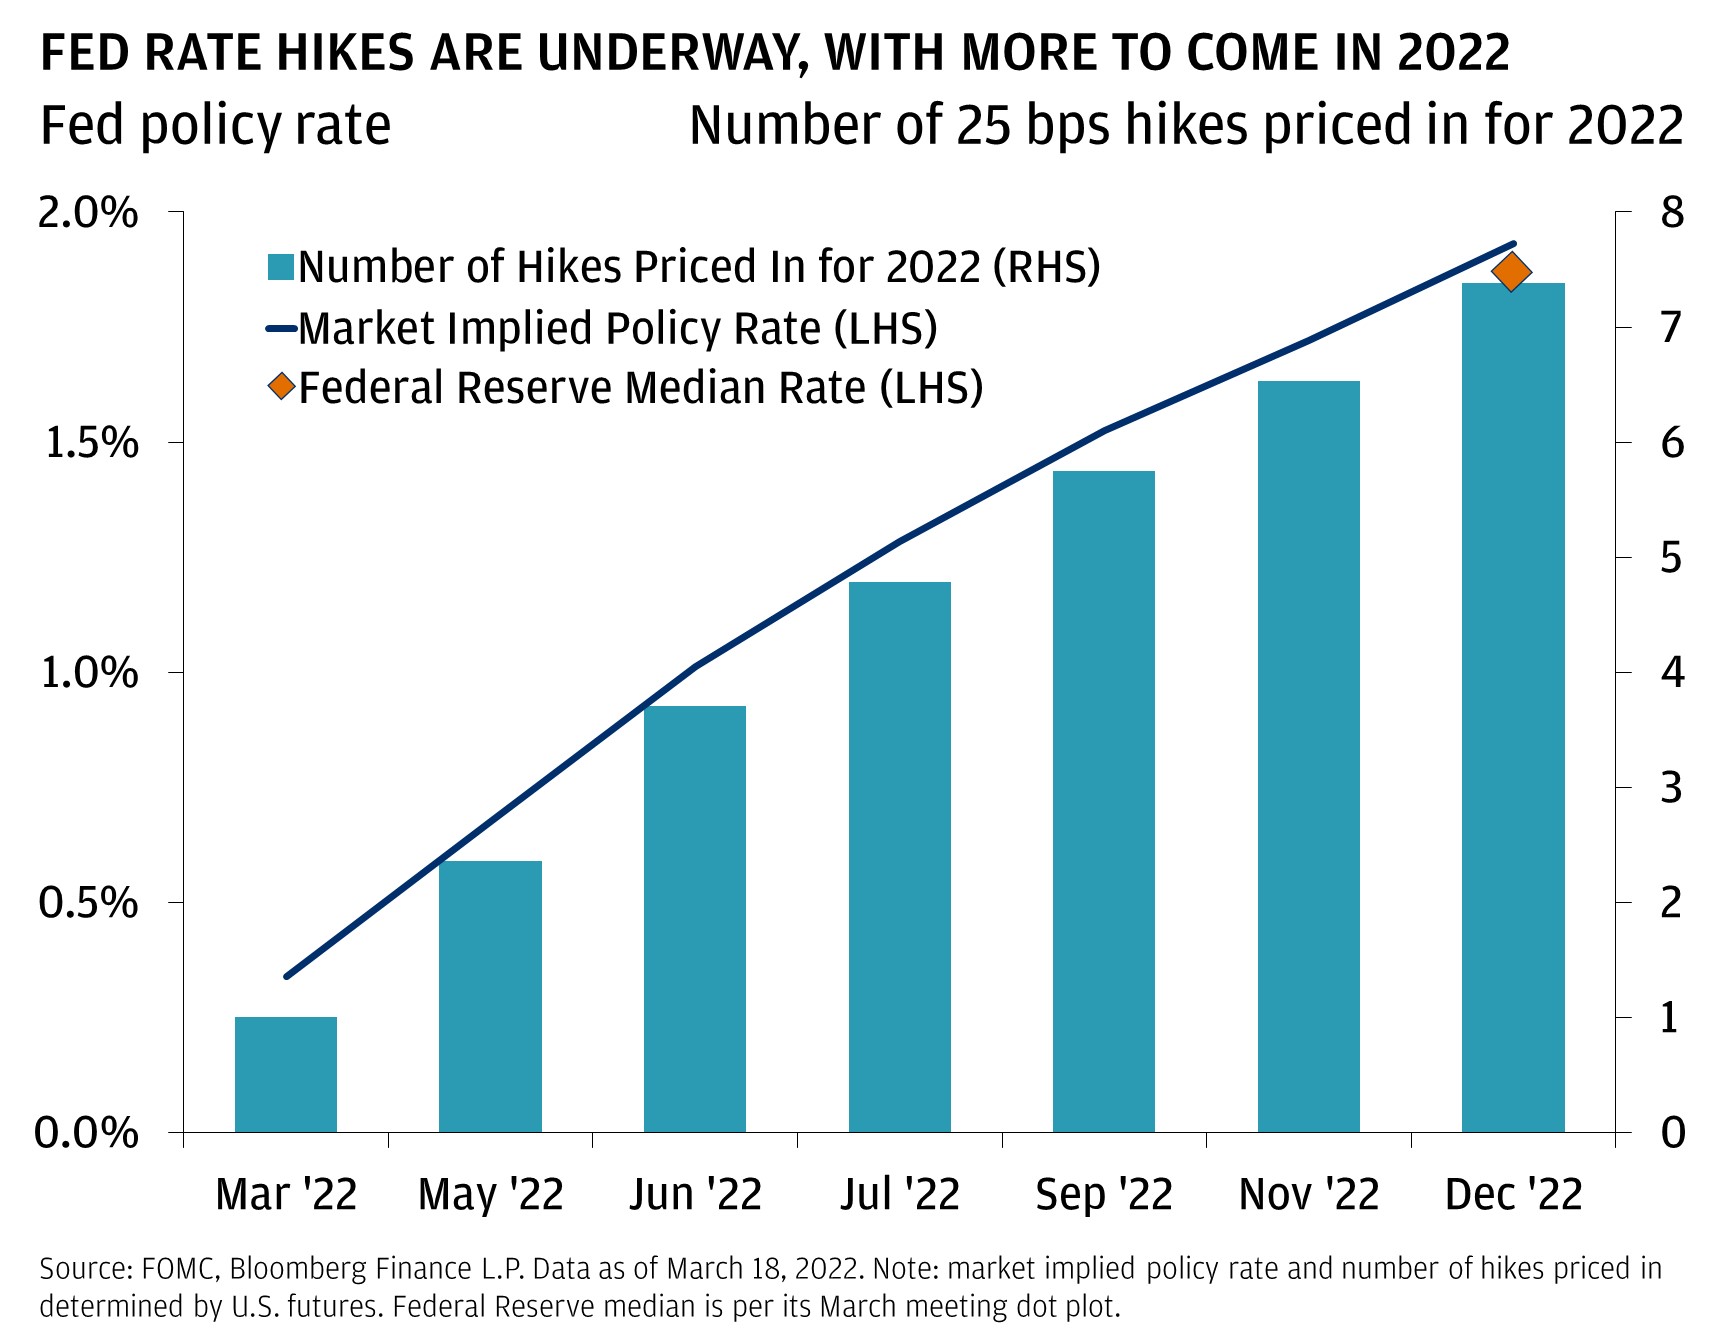 This chart shows the implied Fed policy rate from today to February of next year, and the number of hikes priced into the market. FED RATE HIKES ARE UNDERWAY, WITH MORE TO COME IN 2022